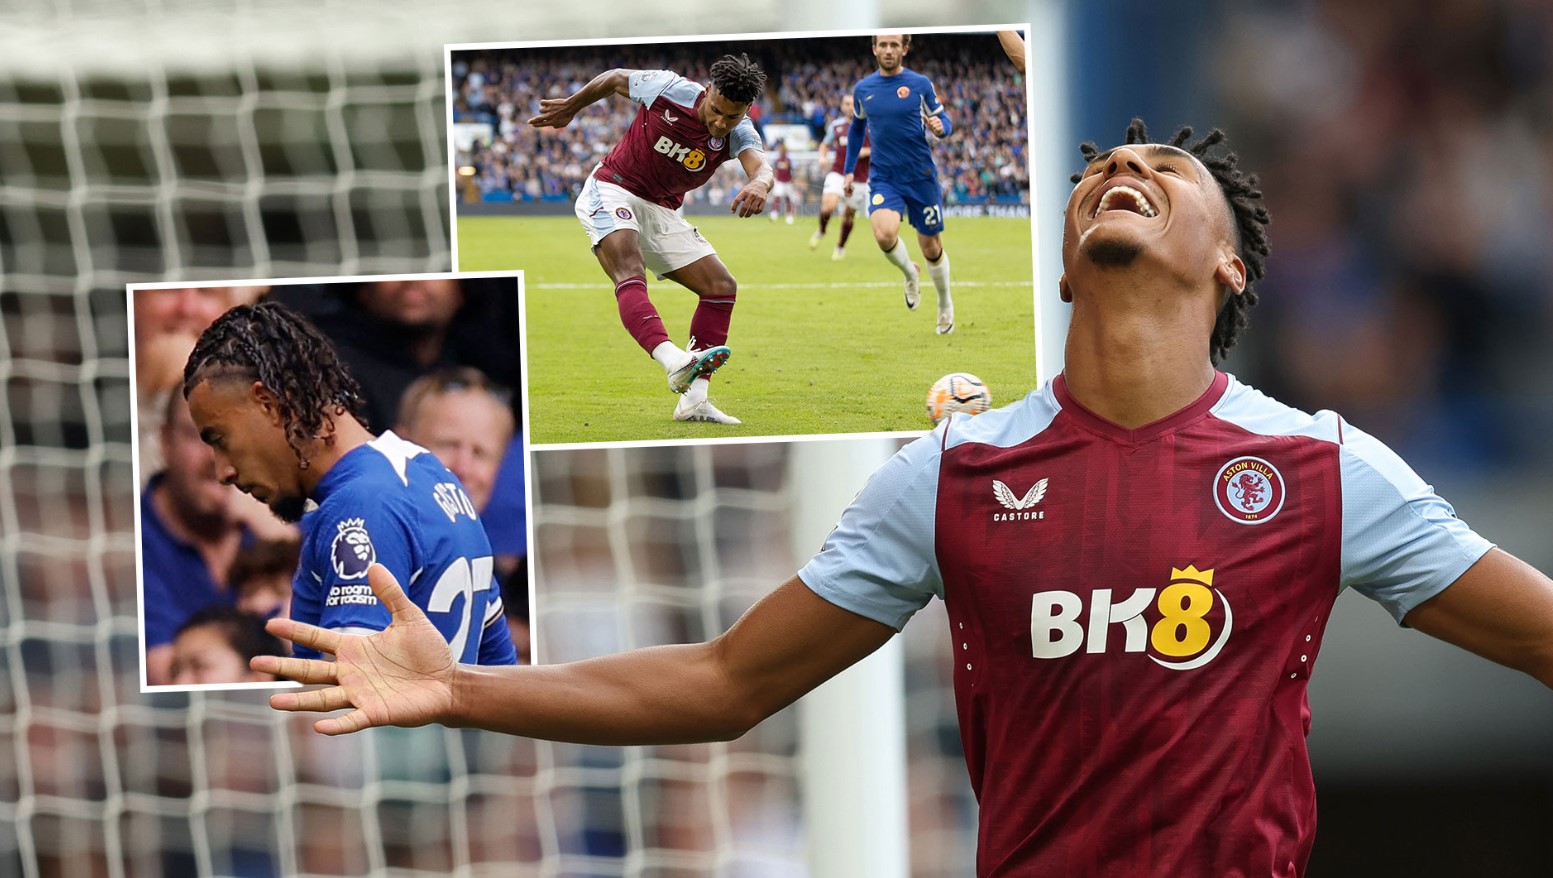 Chelsea started the season with a disappointing loss against Aston Villa